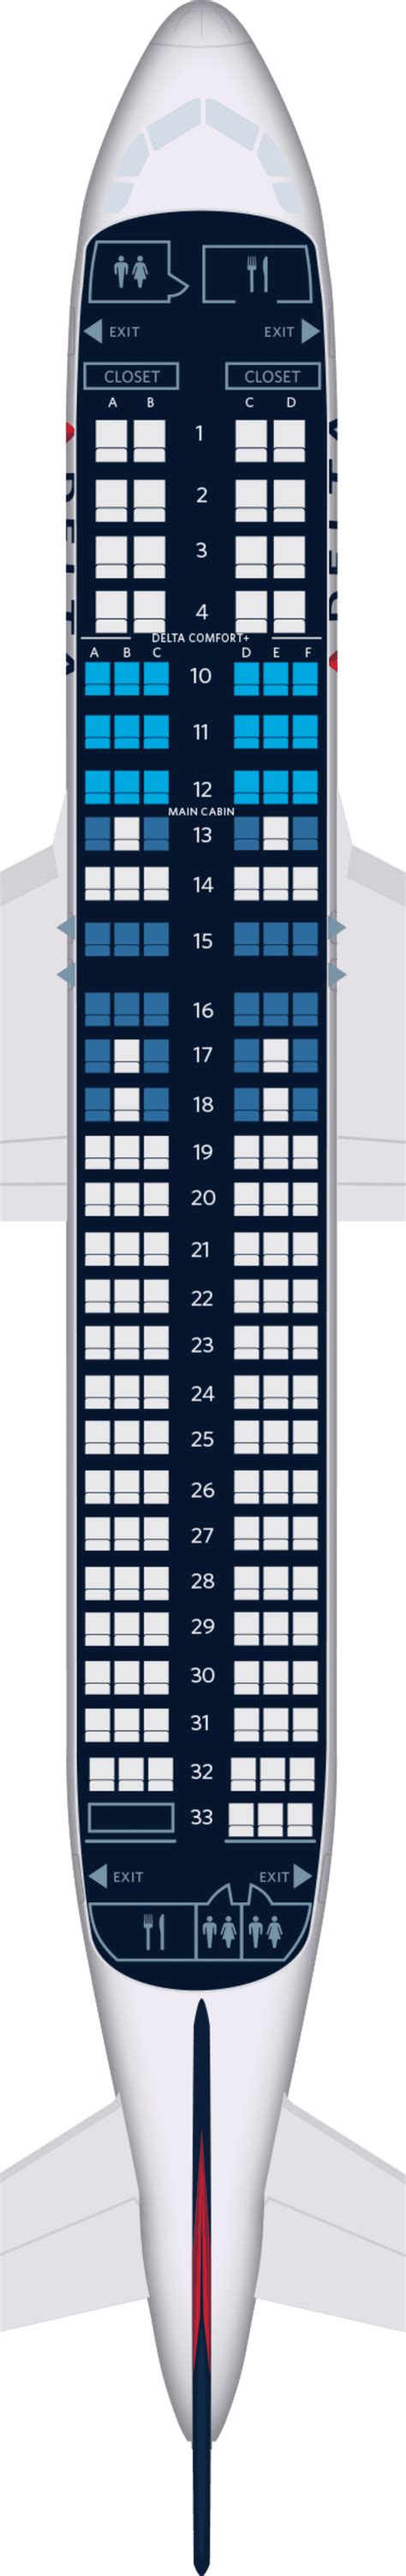 Delta Airlines Seating Chart Airbus A320